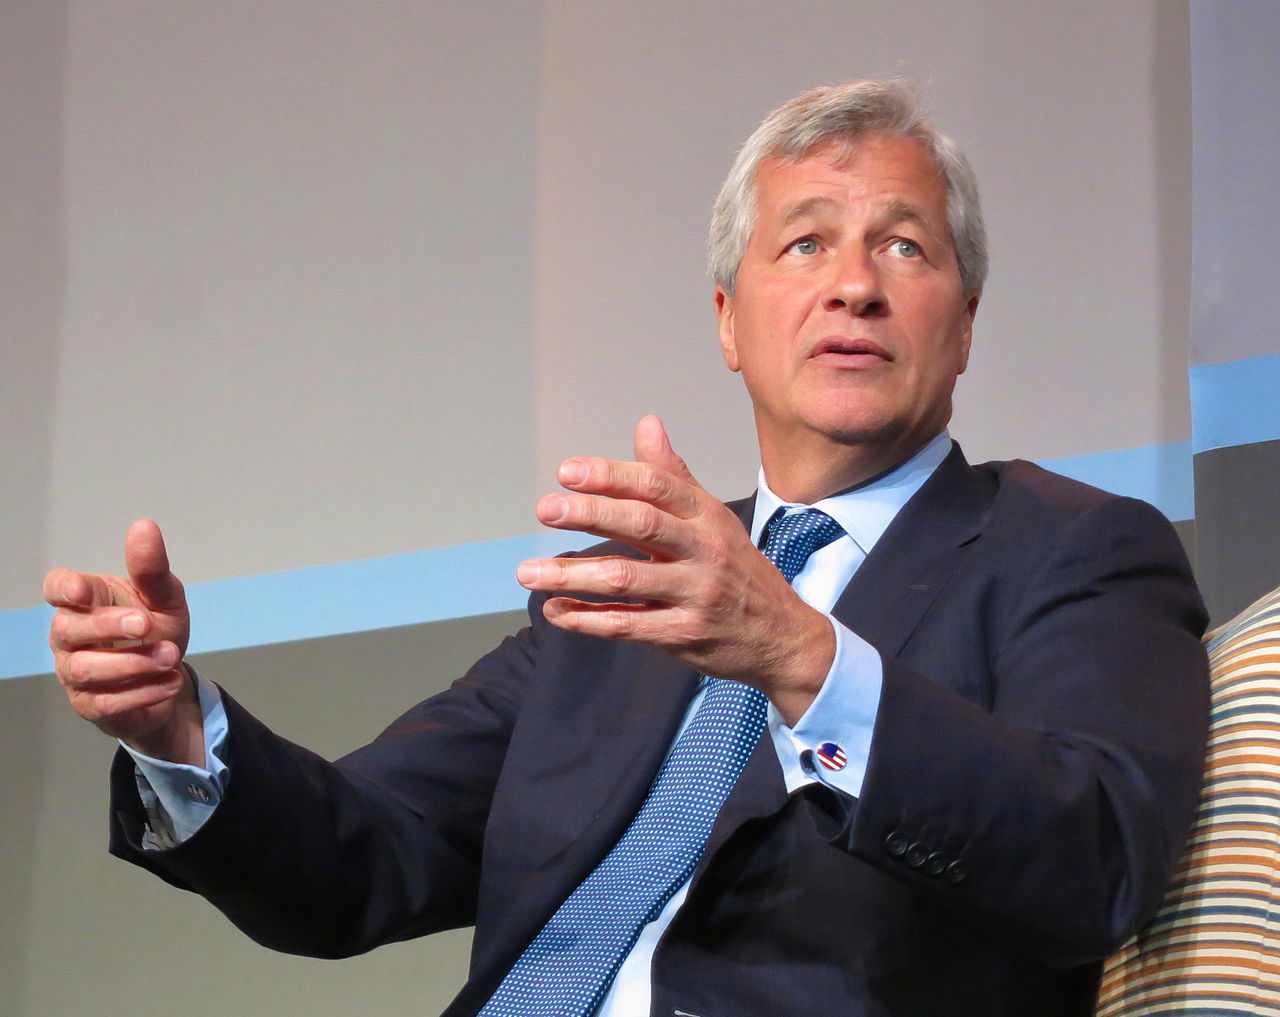 JPMorgan CEO Jamie Dimon: US could experience RECESSION within 6 to 9 months